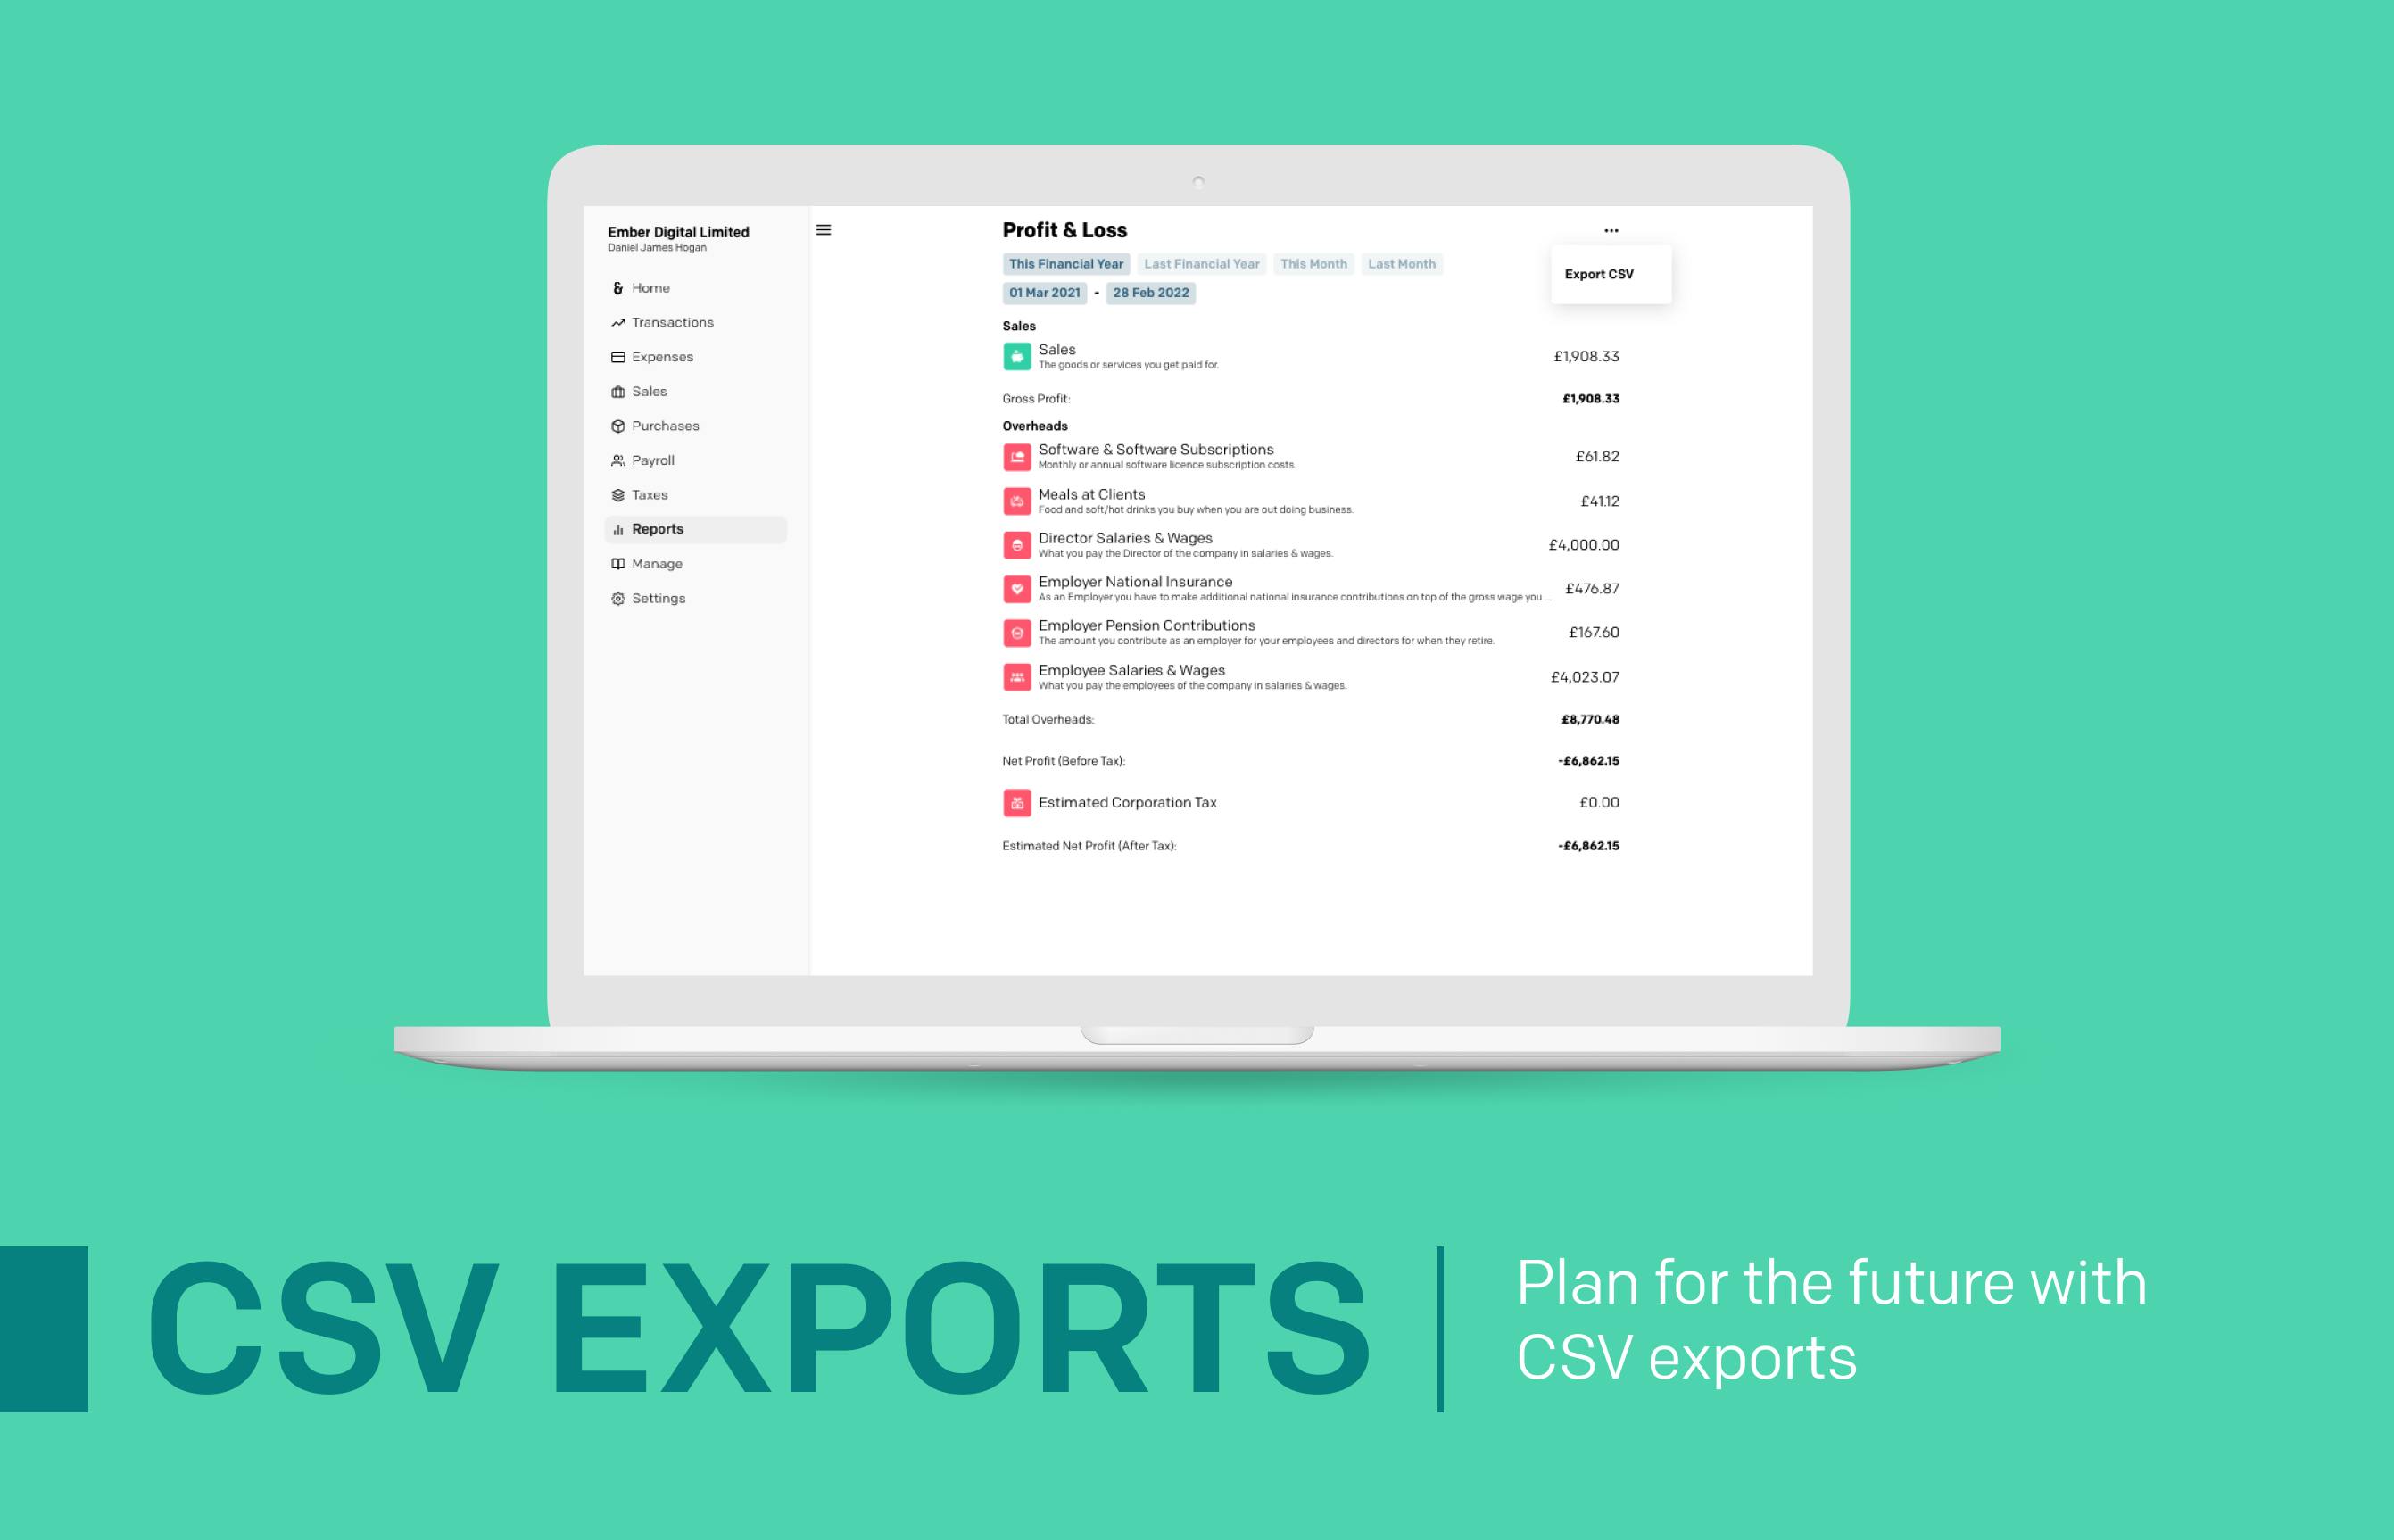 Export options showcased on the Profit & Loss page / Screenshot from Ember